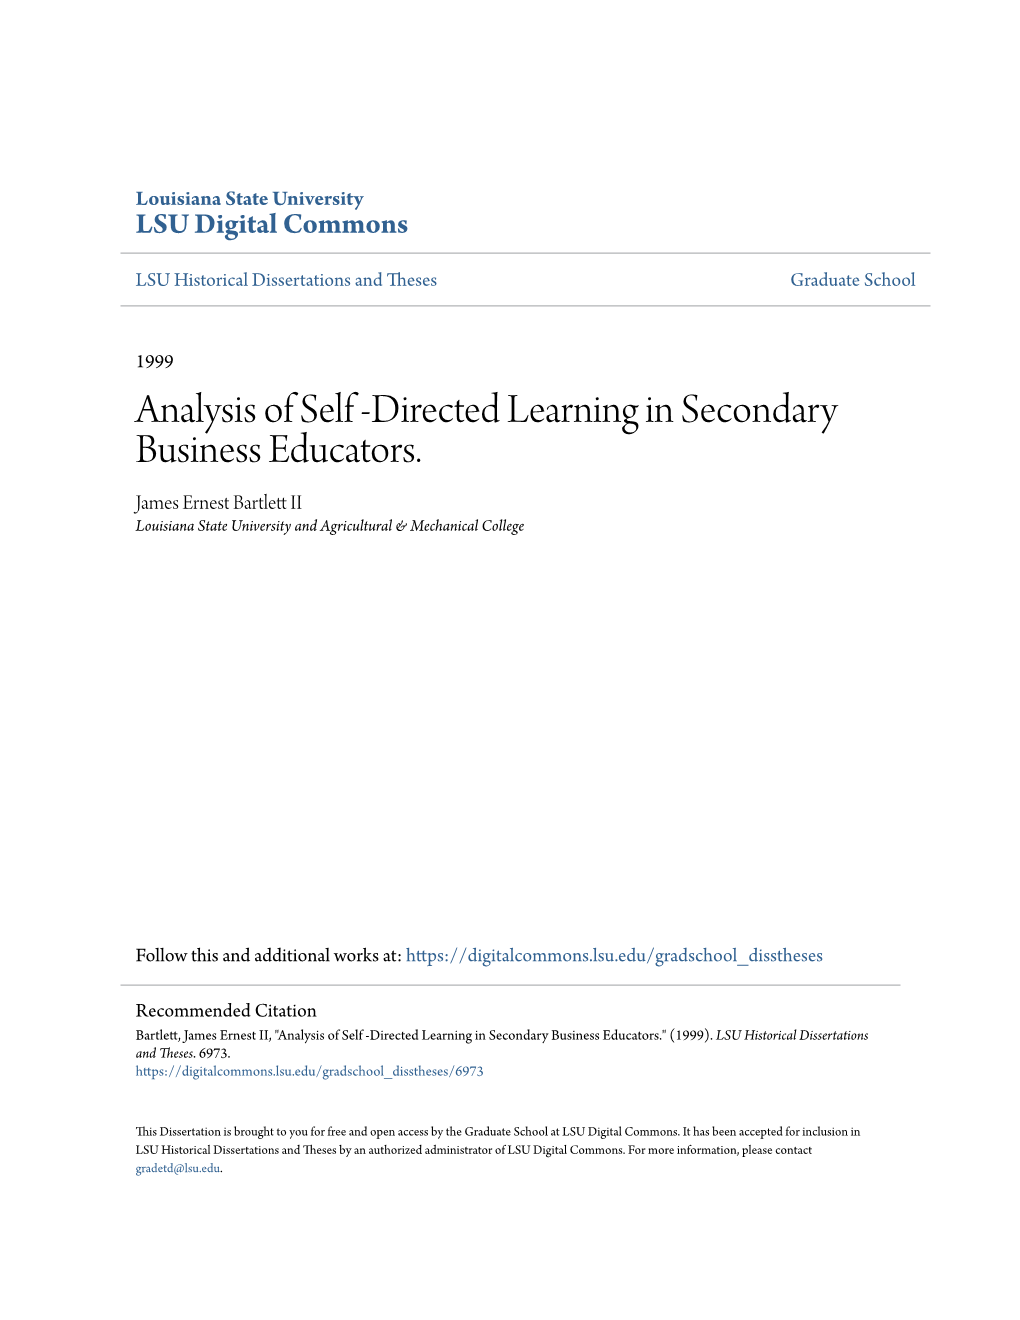 Analysis of Self -Directed Learning in Secondary Business Educators. James Ernest Bartlett II Louisiana State University and Agricultural & Mechanical College